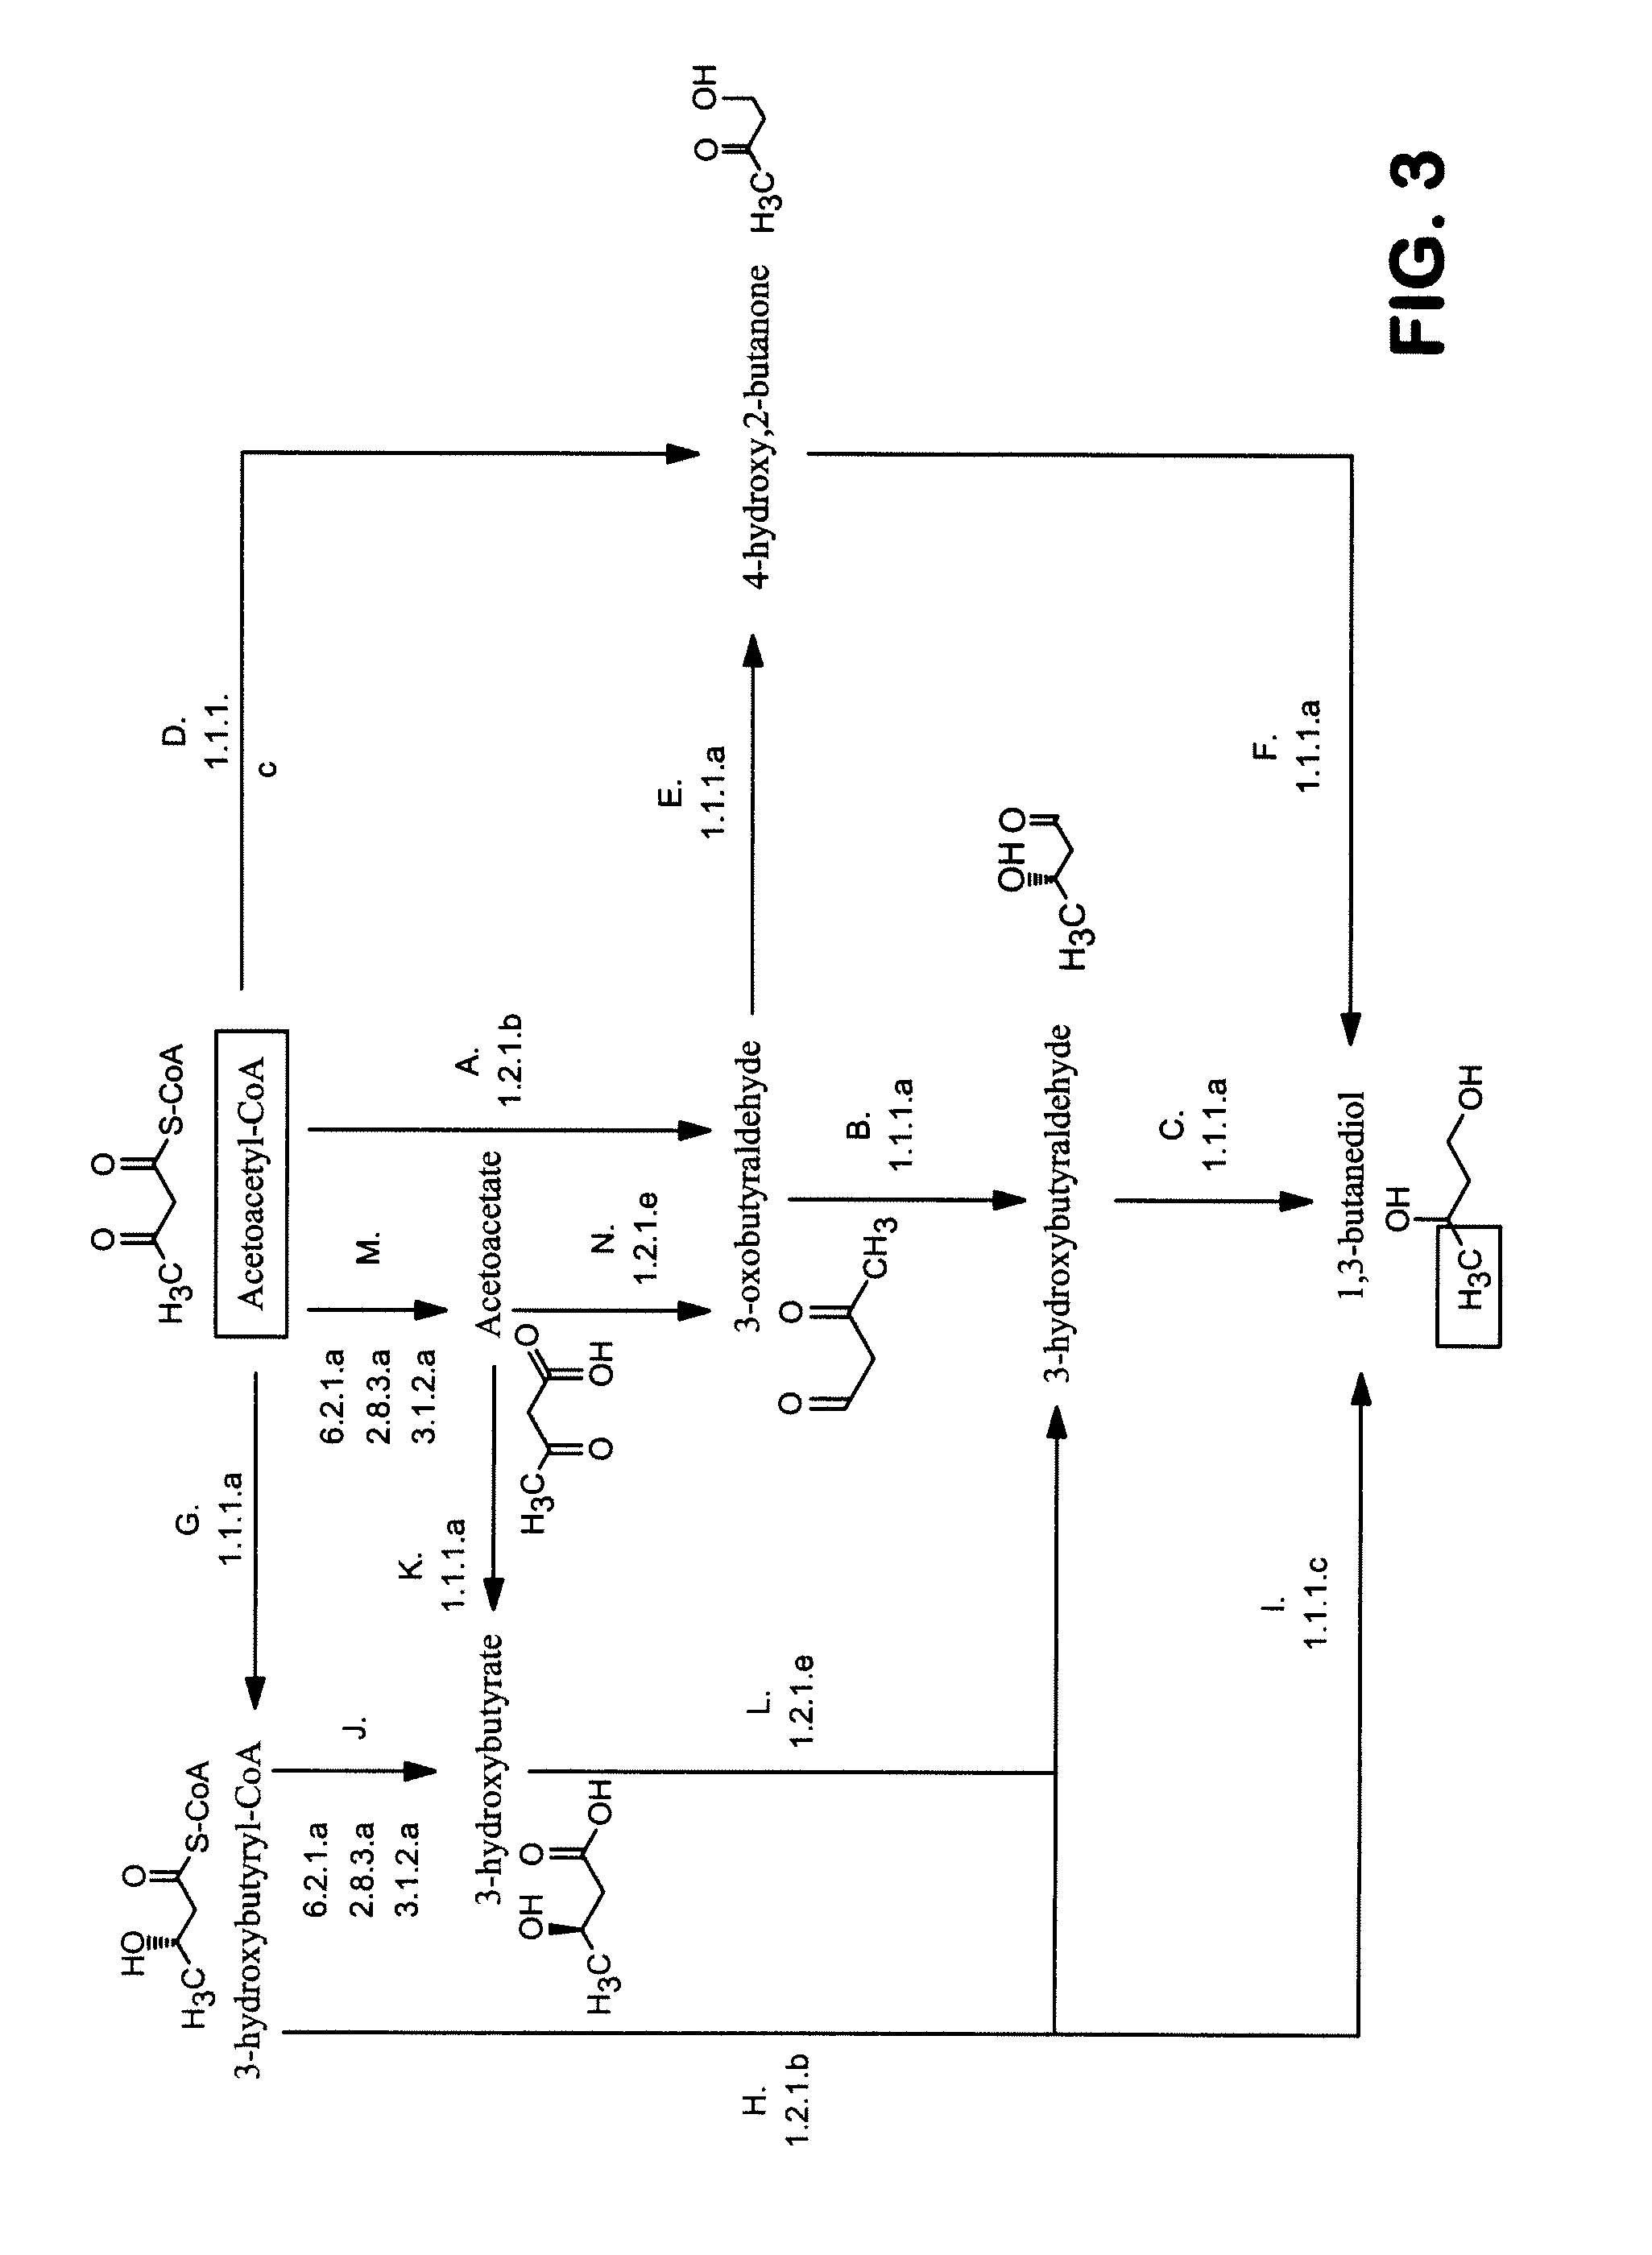 Methods and organisms for converting synthesis gas or other gaseous carbon sources and methanol to 1,3-butanediol